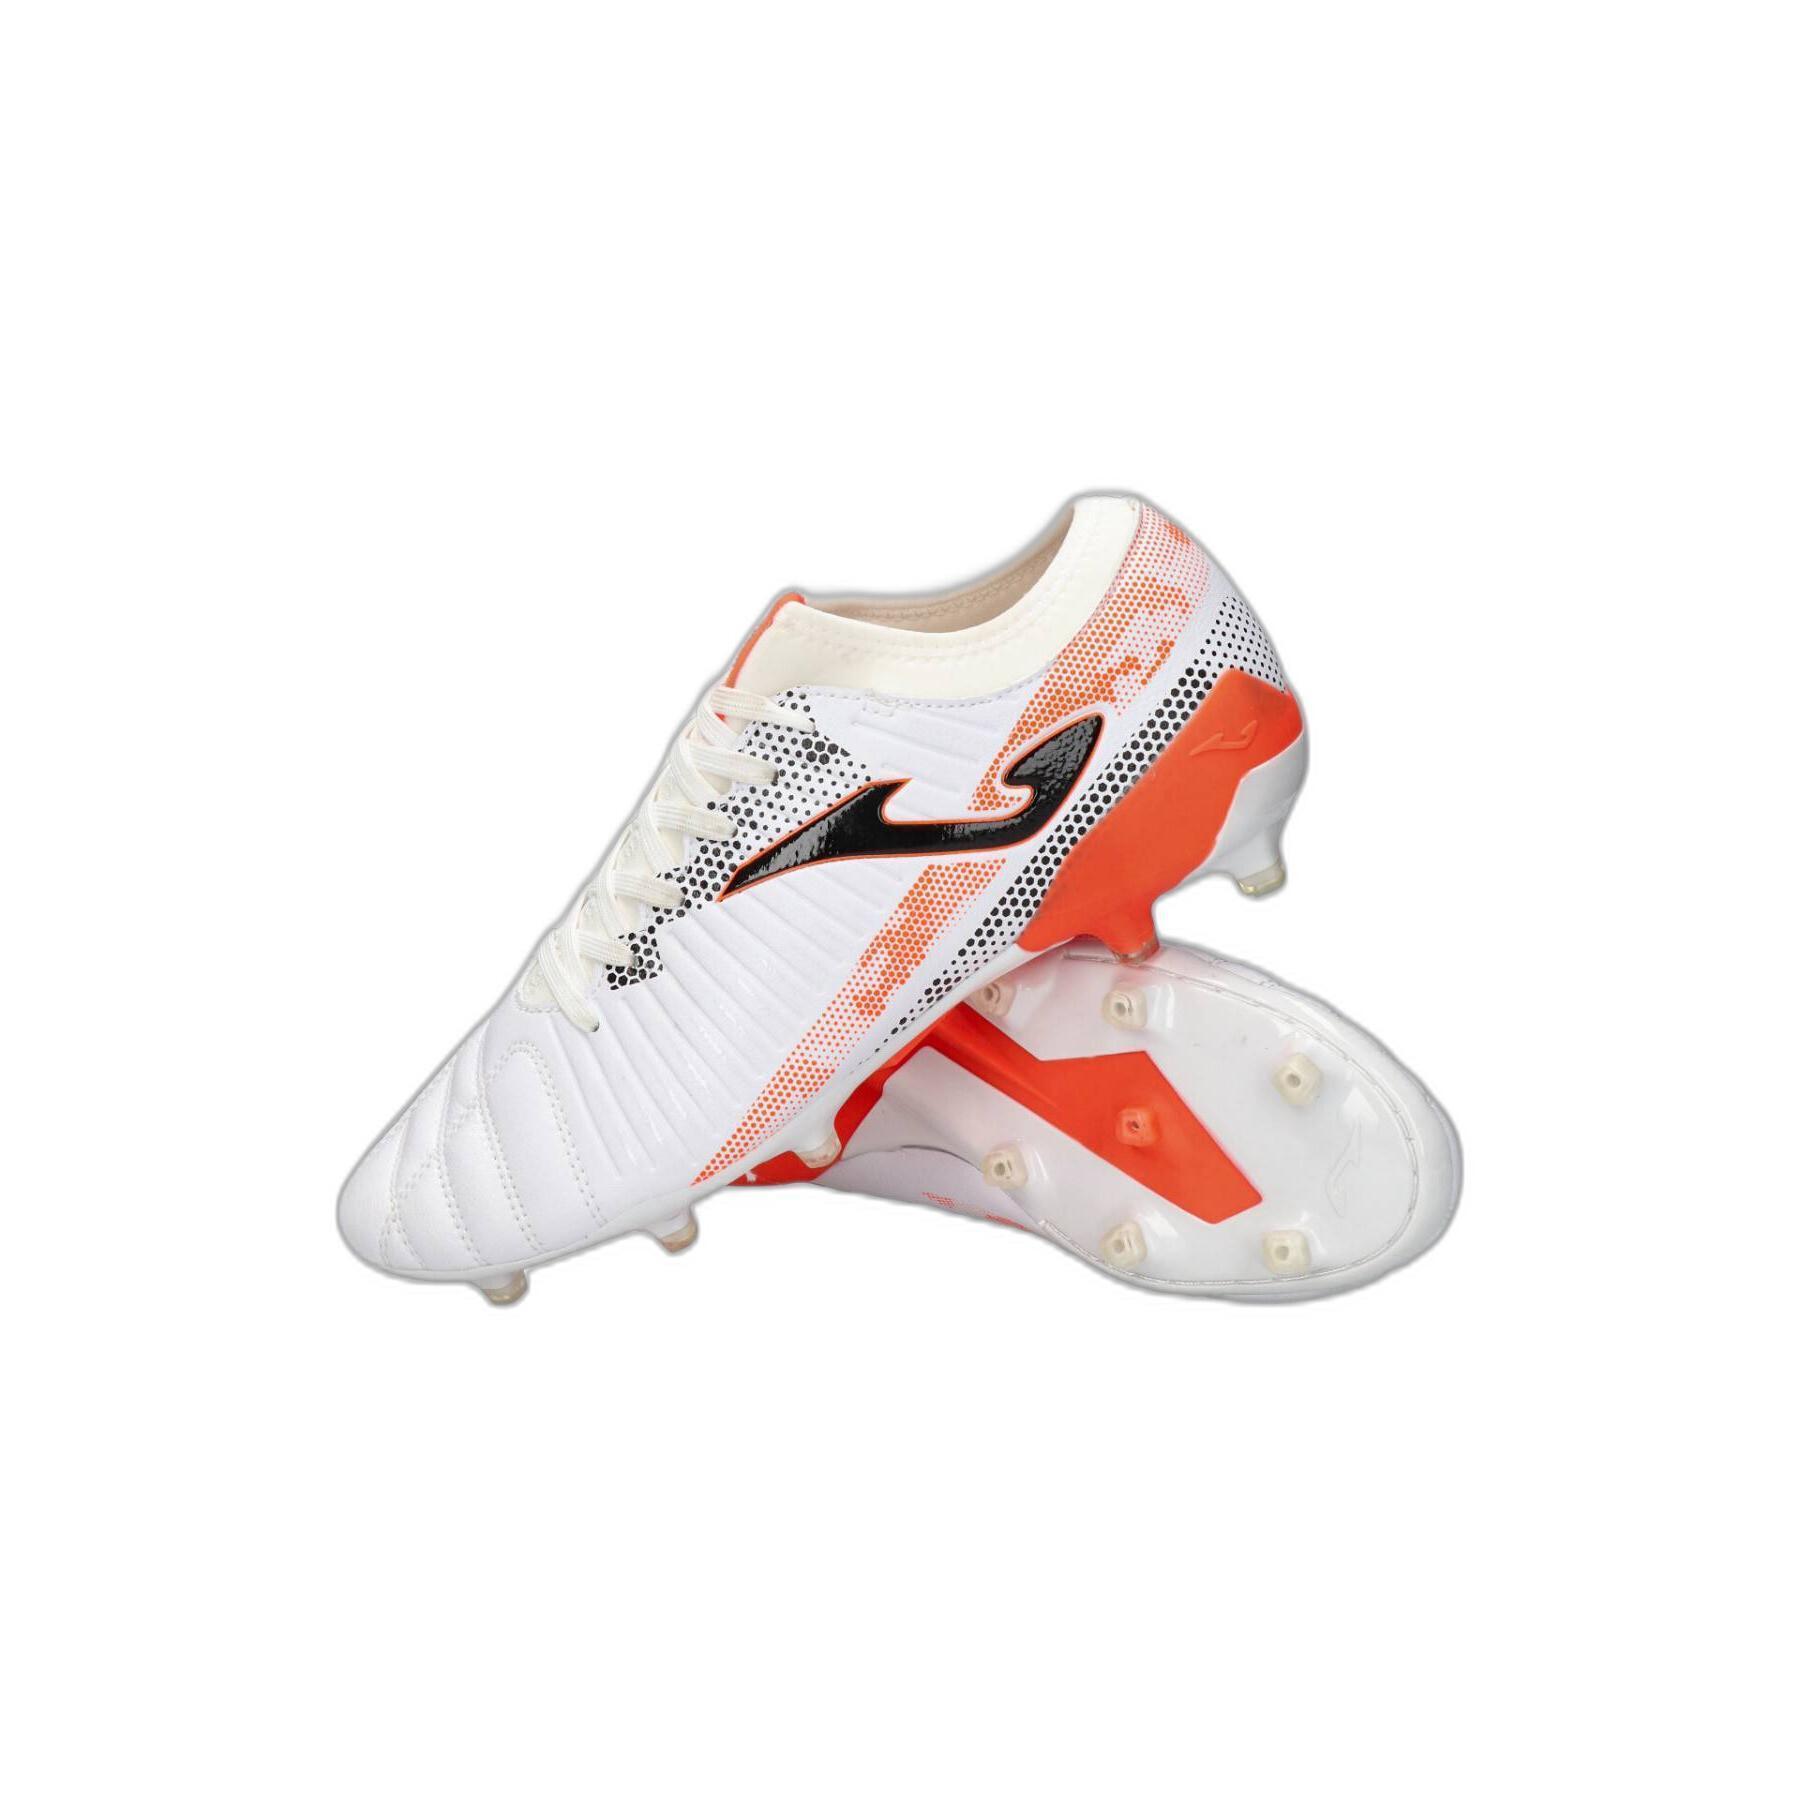 Chaussures de football Joma propulison cup FG